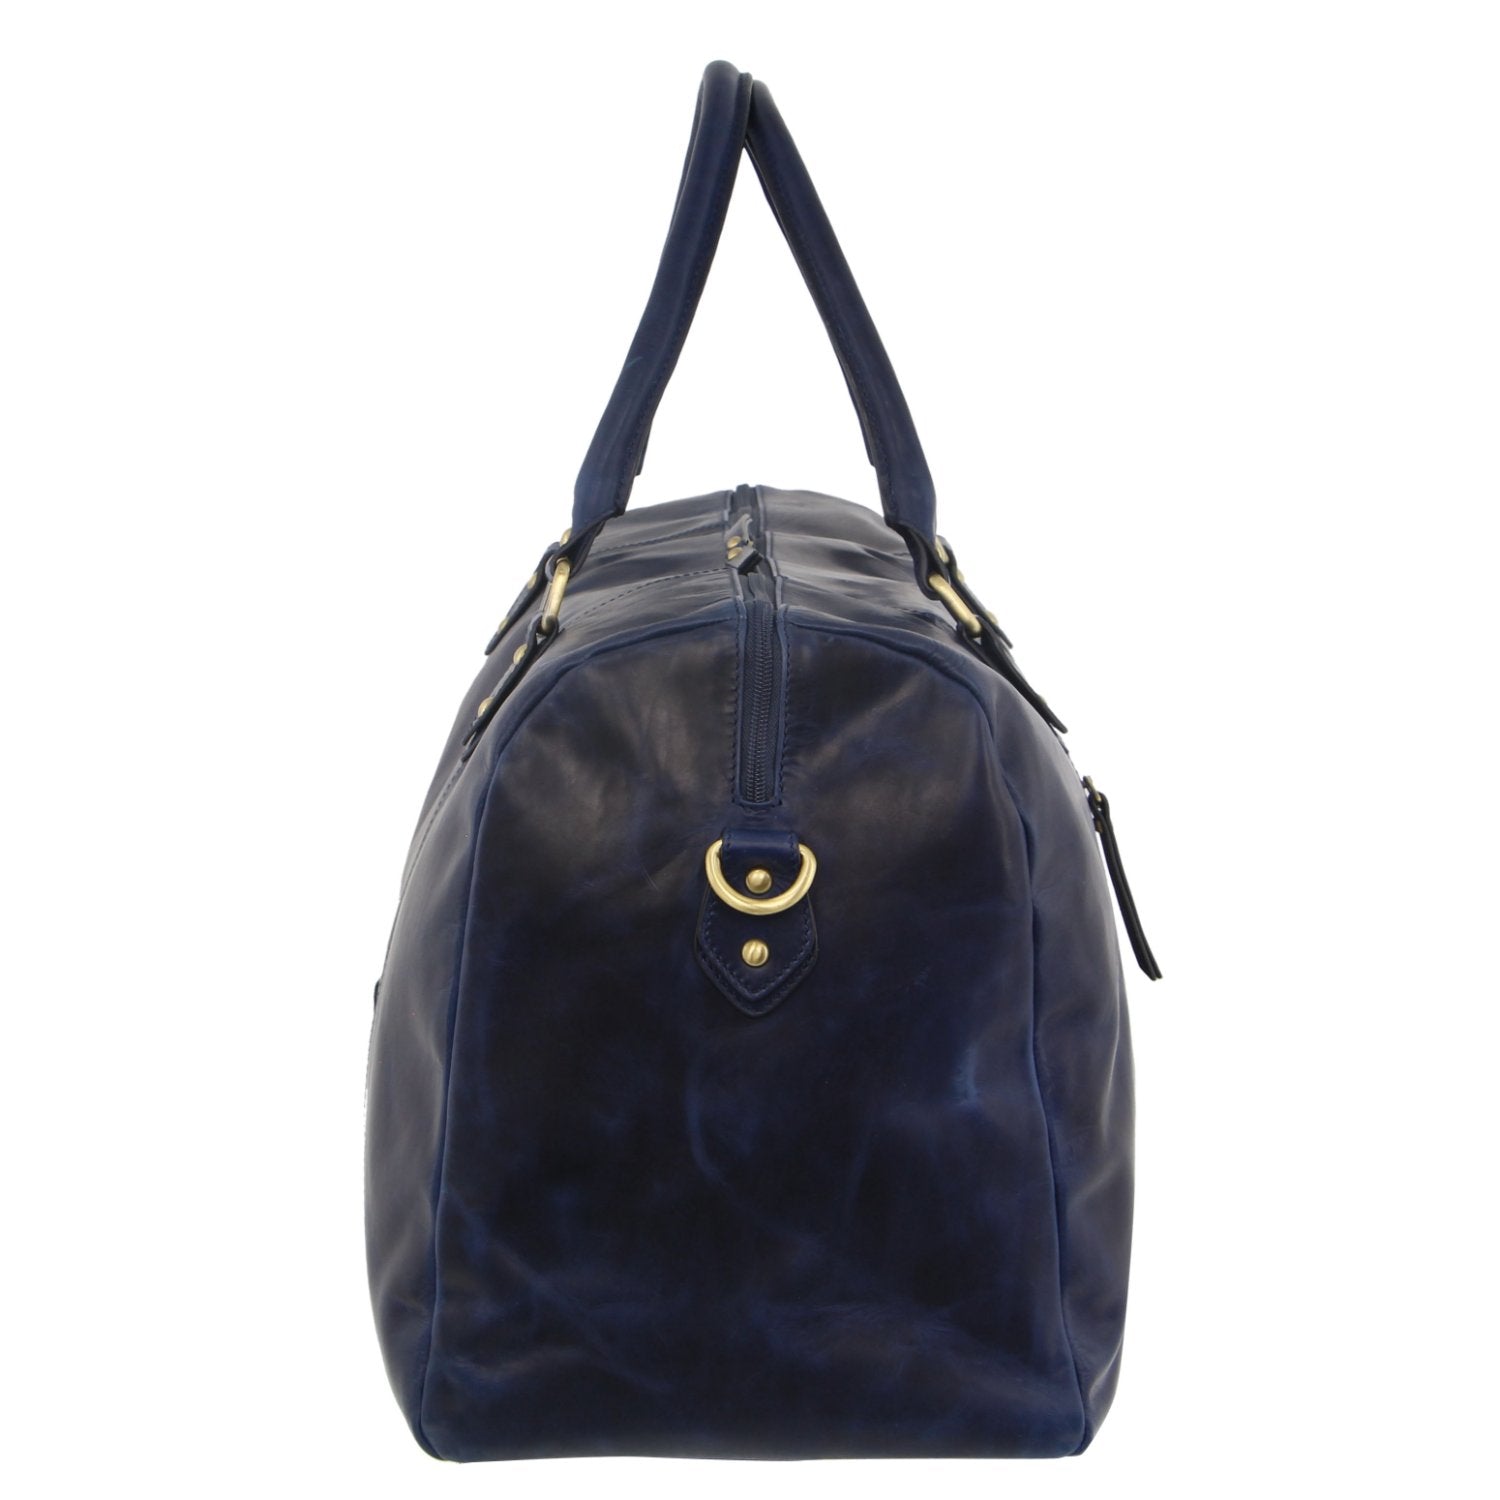 Pierre Cardin Smooth Leather Overnight Bag in Midnight